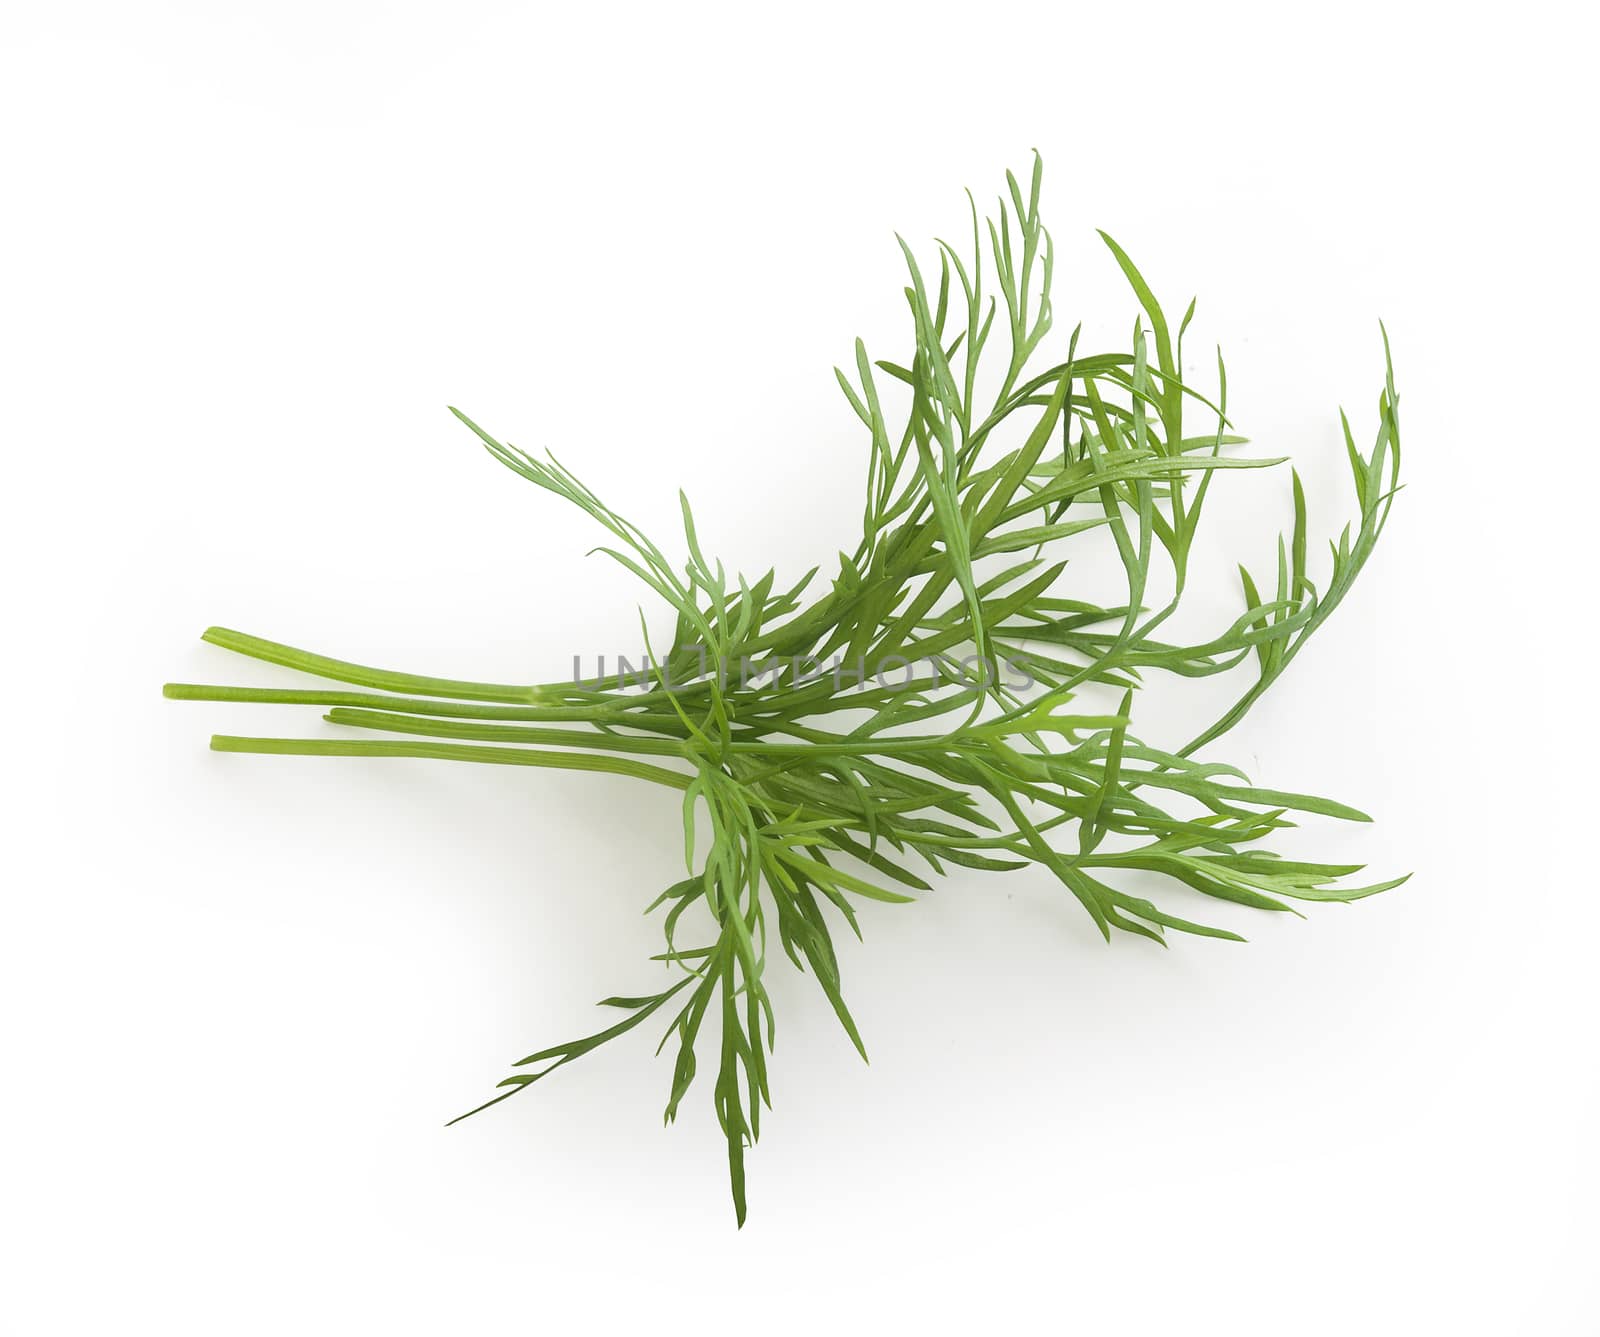 Small bundle of dill sprigs by Angorius